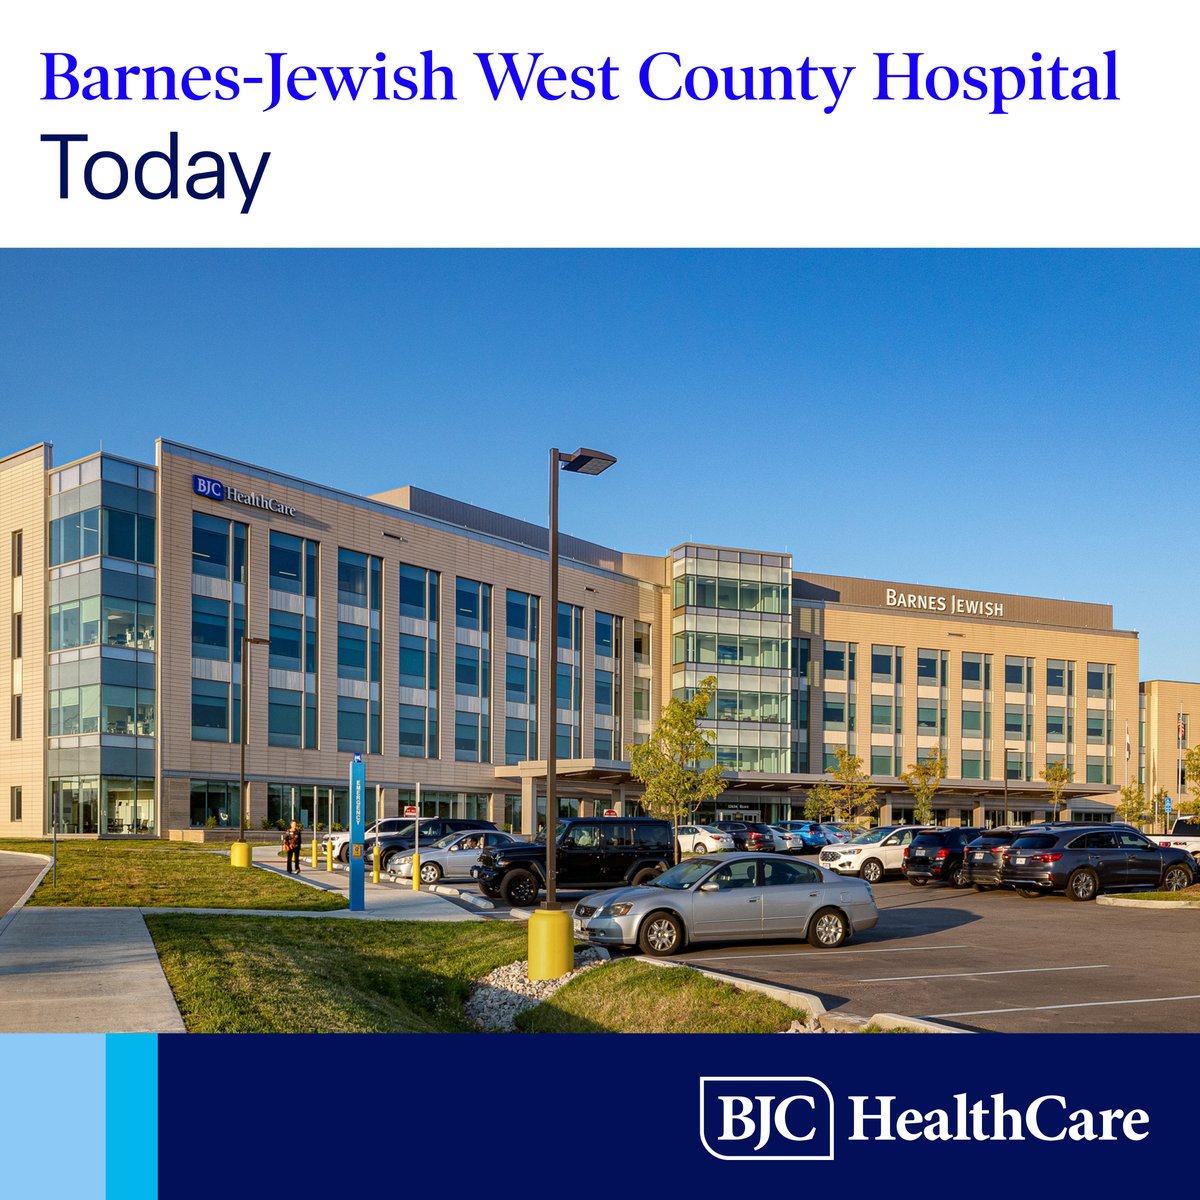 This year marks BJC HealthCare’s 30th anniversary as a system — and we’re taking a look back at where it all started. This week’s feature is Barnes-Jewish West County Hospital.